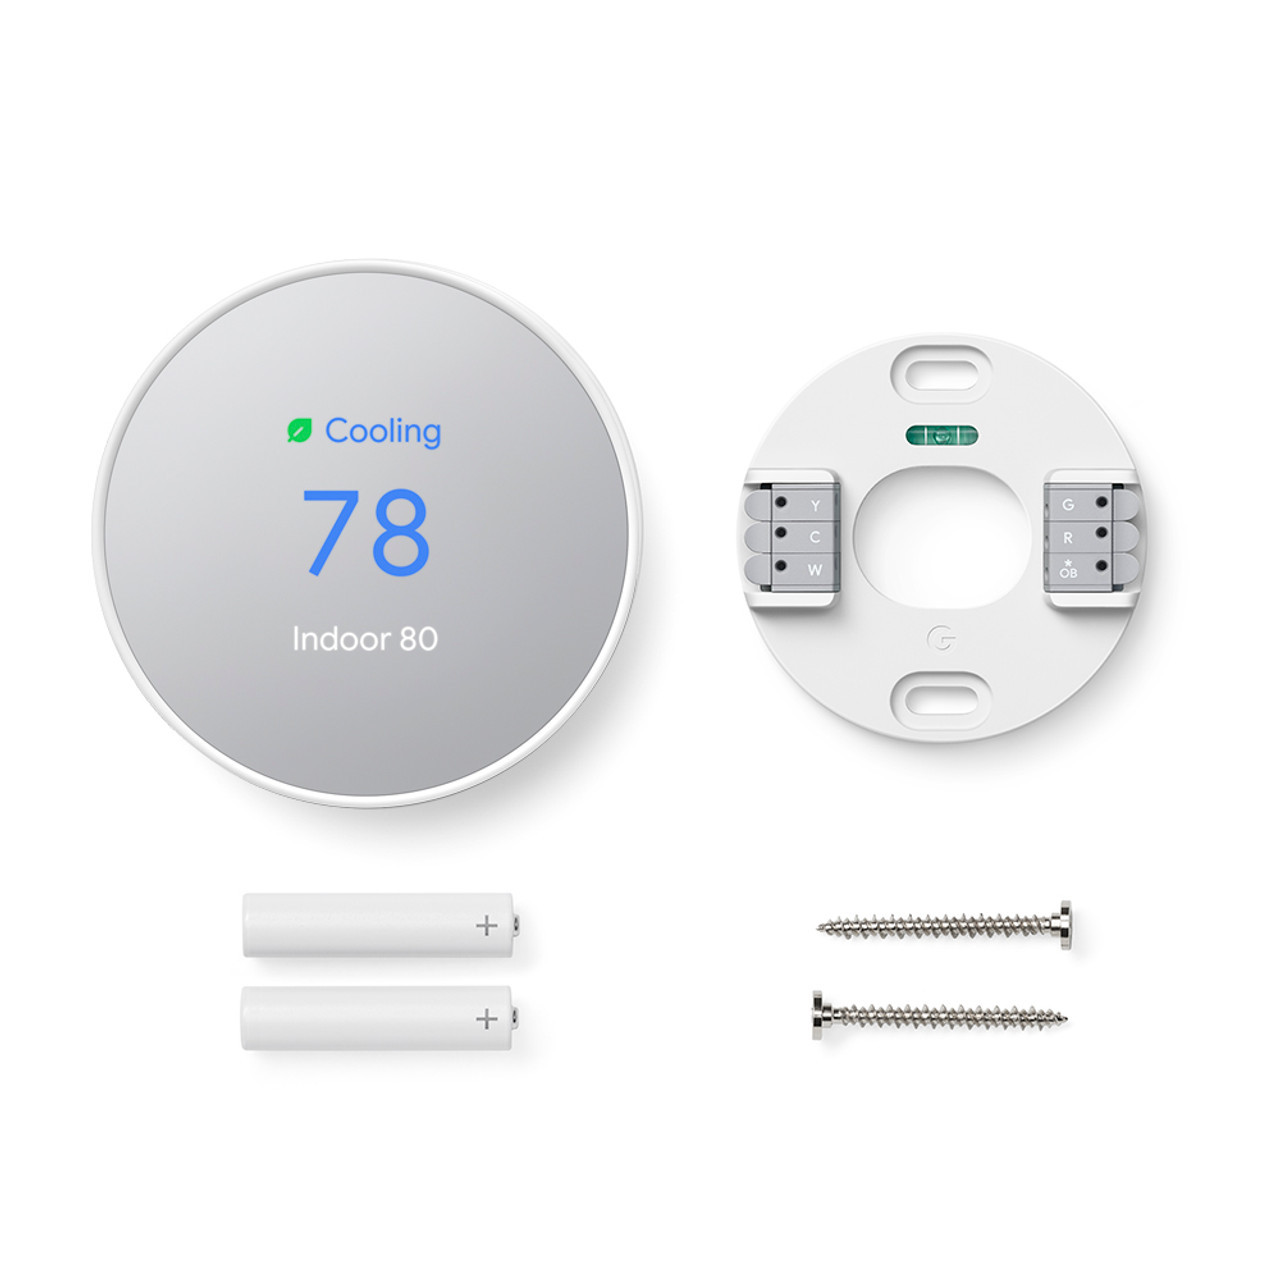 https://cdn11.bigcommerce.com/s-ih6ina3dd8/images/stencil/1280x1280/products/252/977/Nest_thermostat-snow-front-back-screws__20239.1635191804__51471.1694717720.jpg?c=2